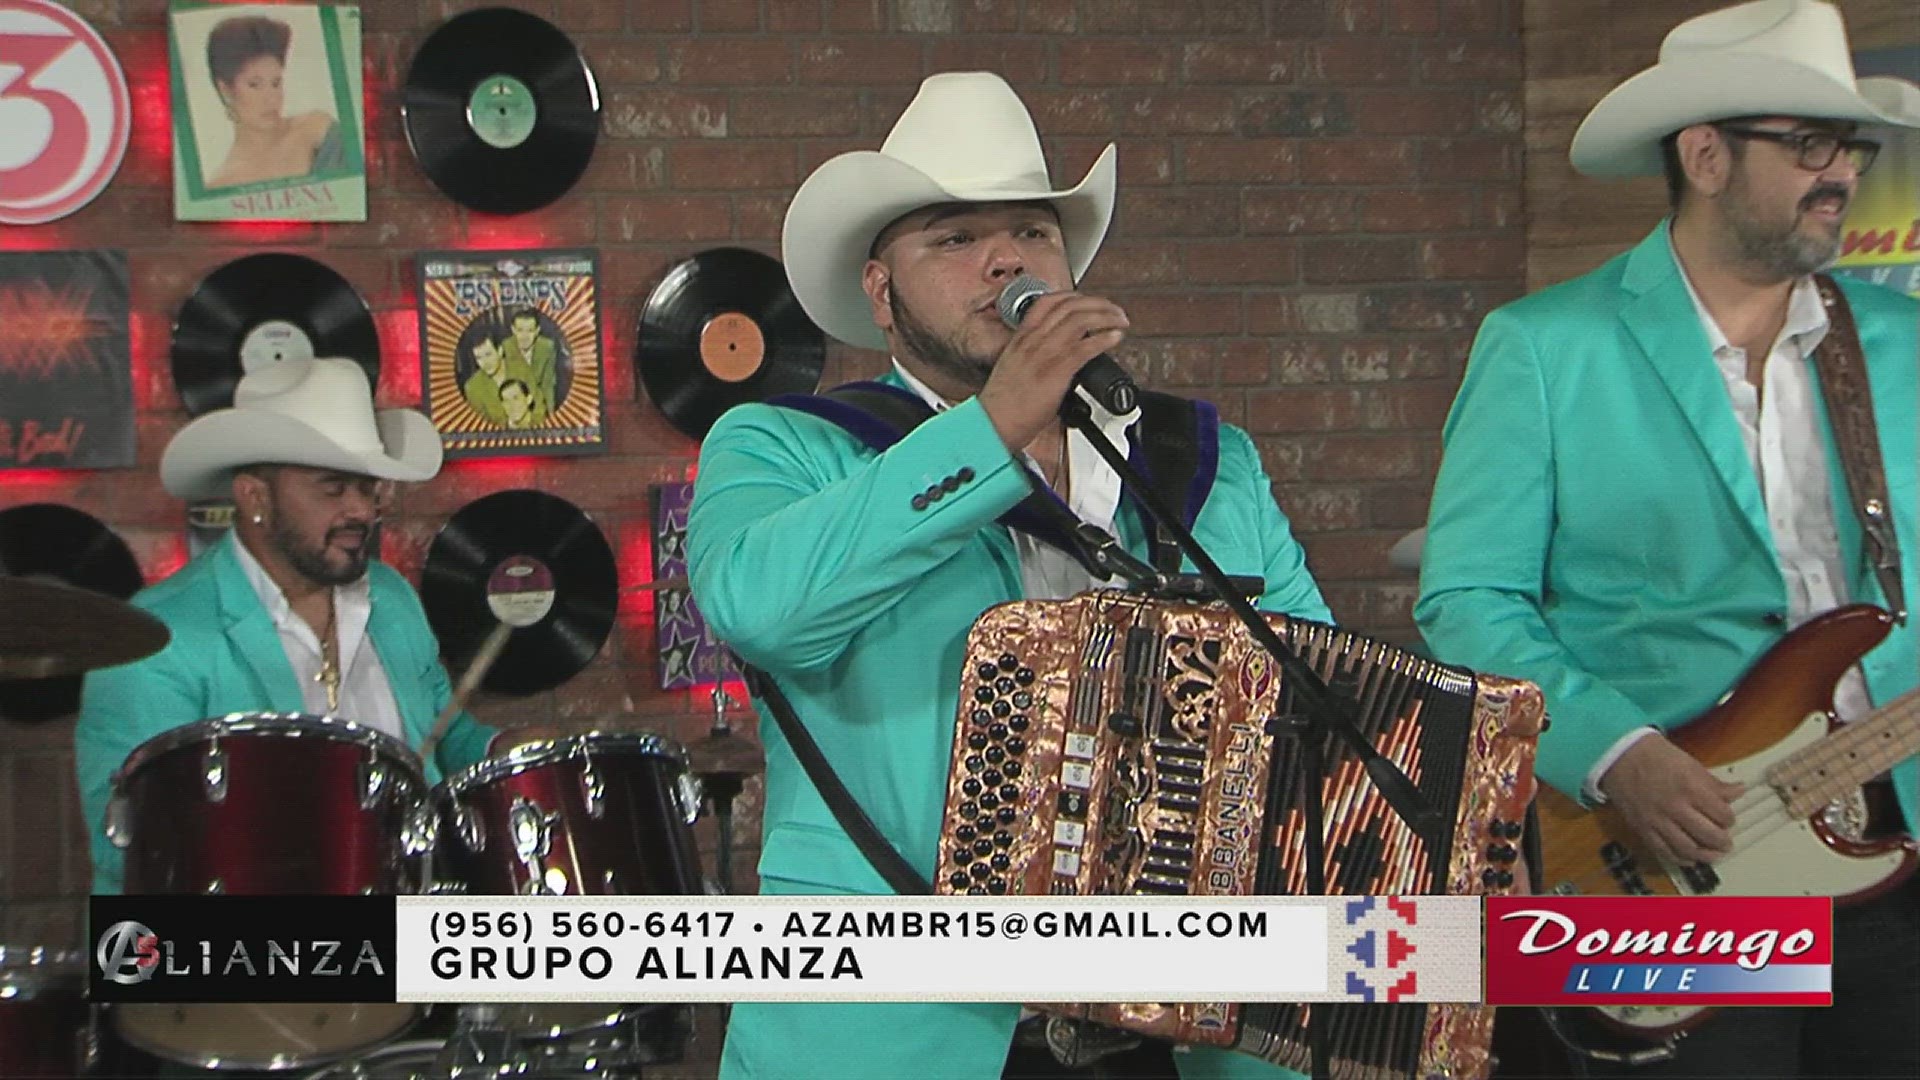 Tejano group, Groupo Alianza joined us live on Domingo Live to perform their song, "Carita de Ángel".